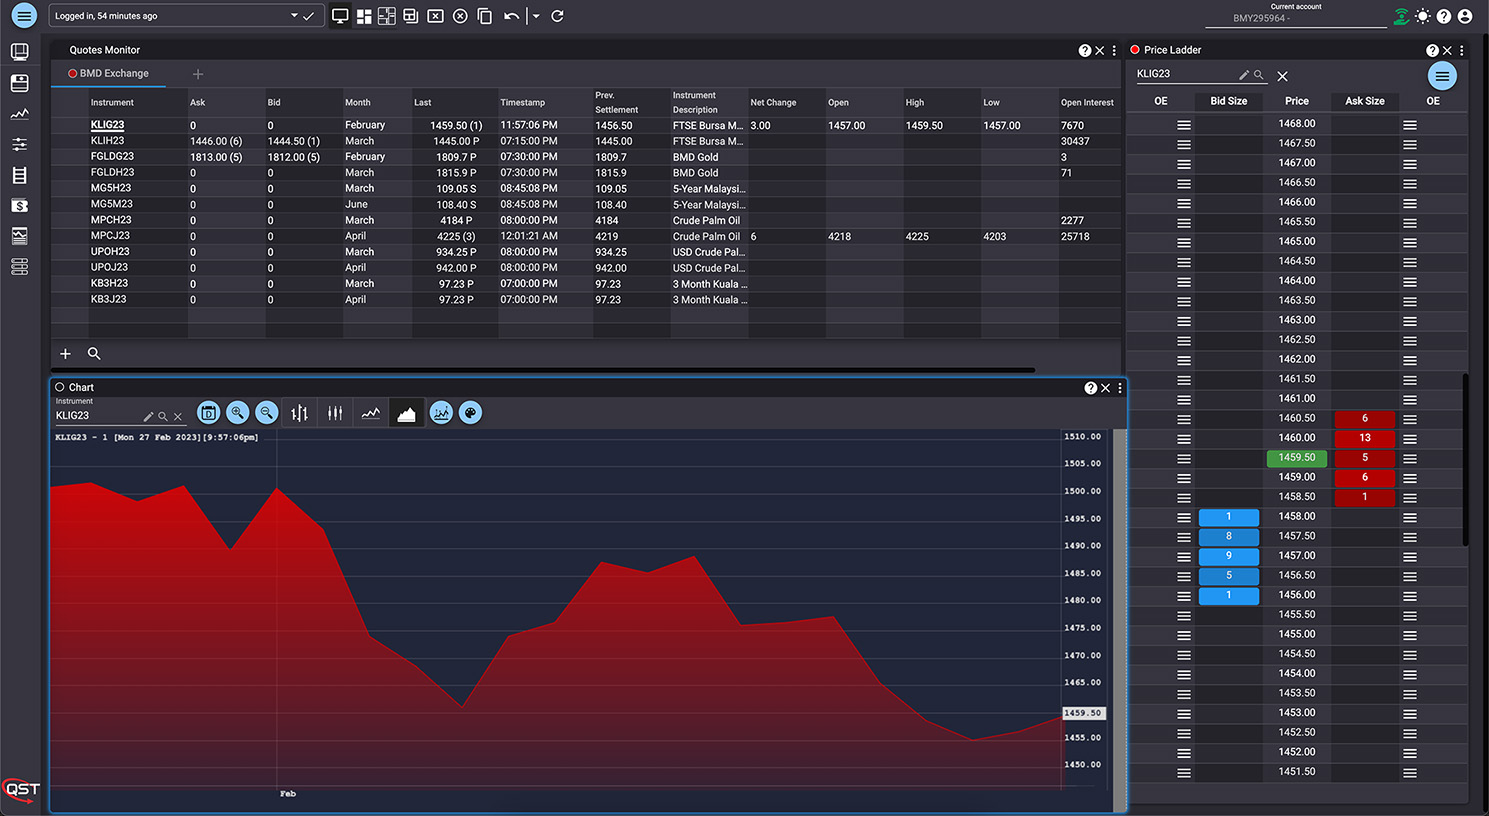 Quick Screen Trading Web Advanced Charts, Tools, Multi-asset Classes, Real-time data